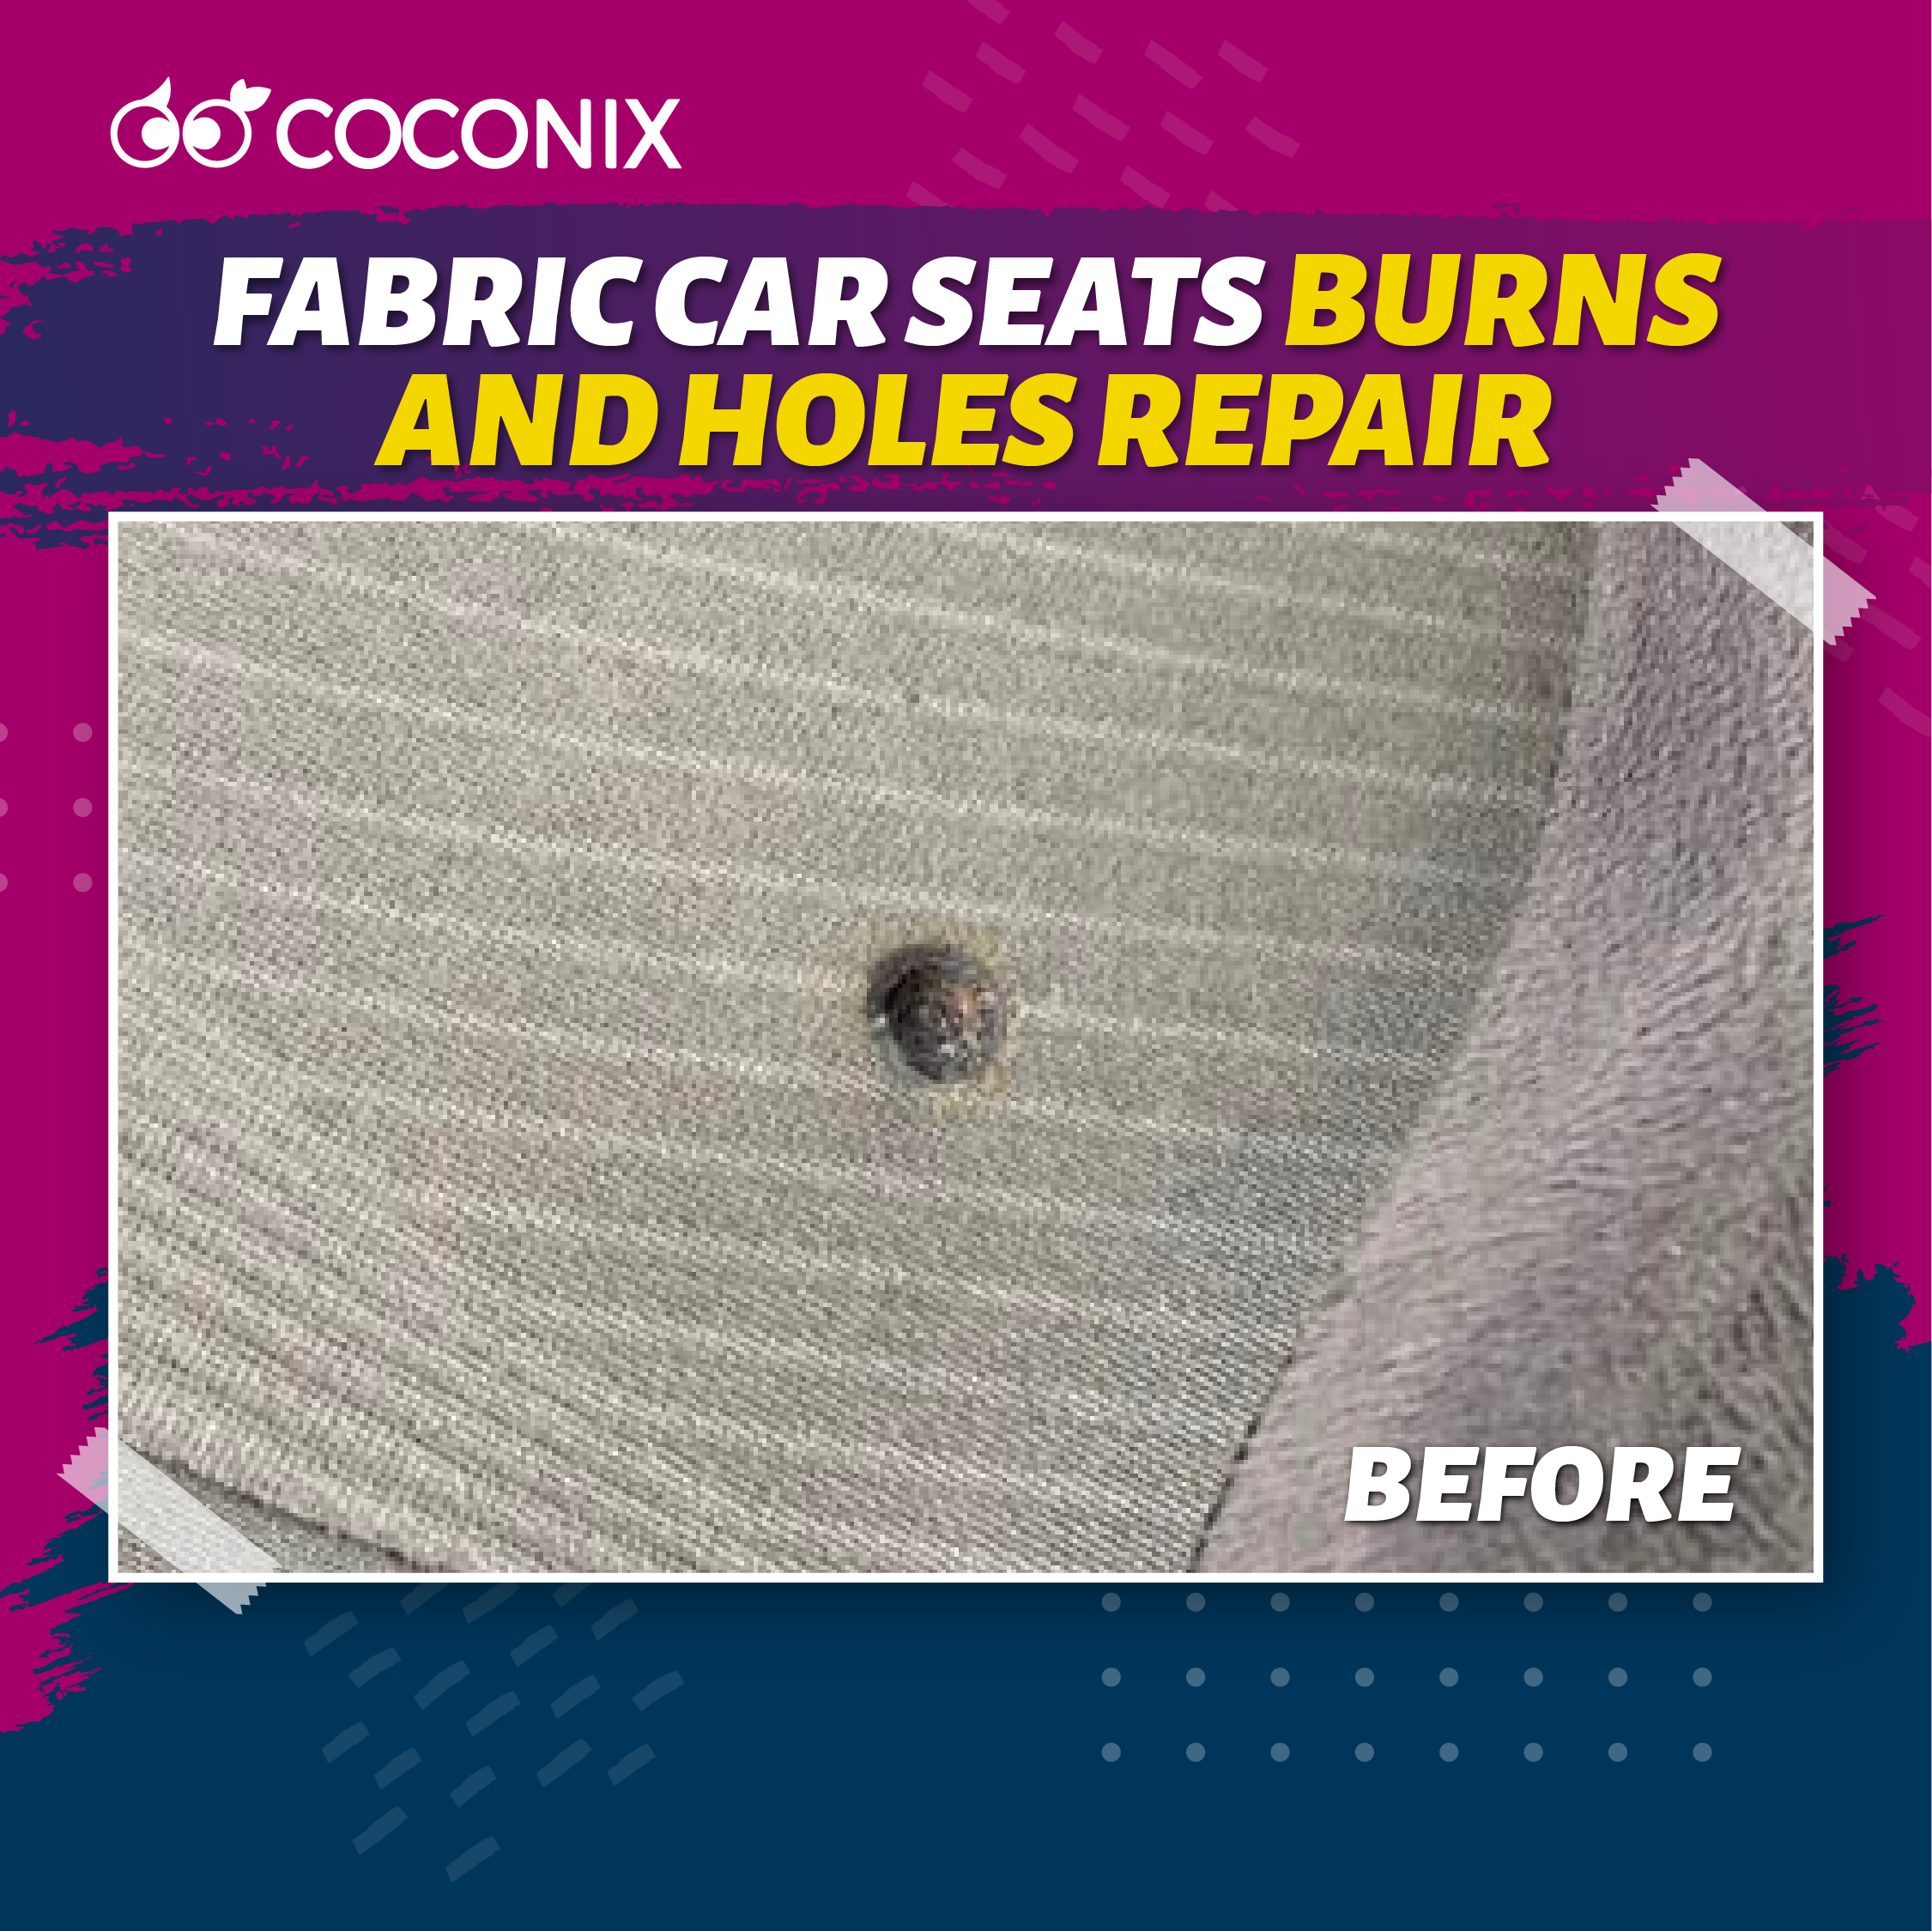 coconix on X: A cigarette burn hole is a damage that can be seen on a  fabric car interior. This can be fixed with Coconix.   / X